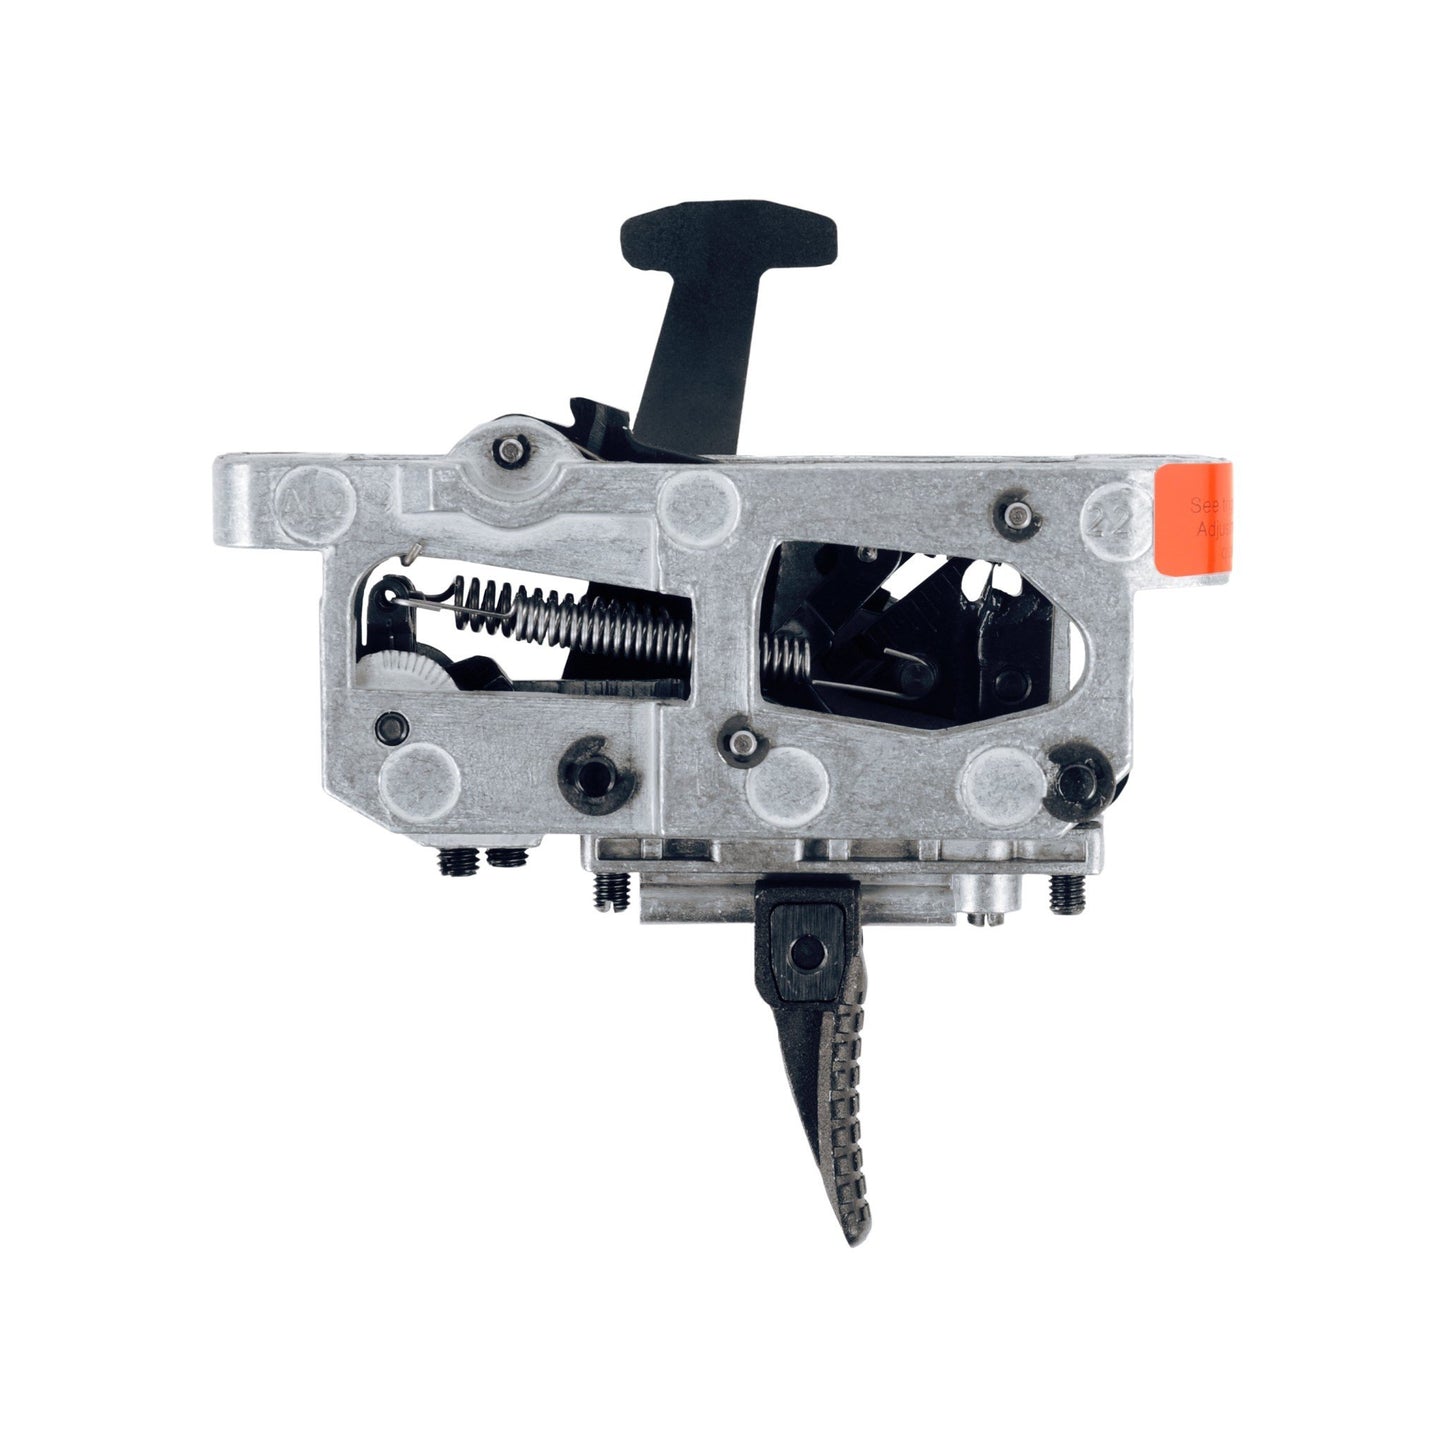 Anschutz 5022 Two-Stage Trigger 1550g